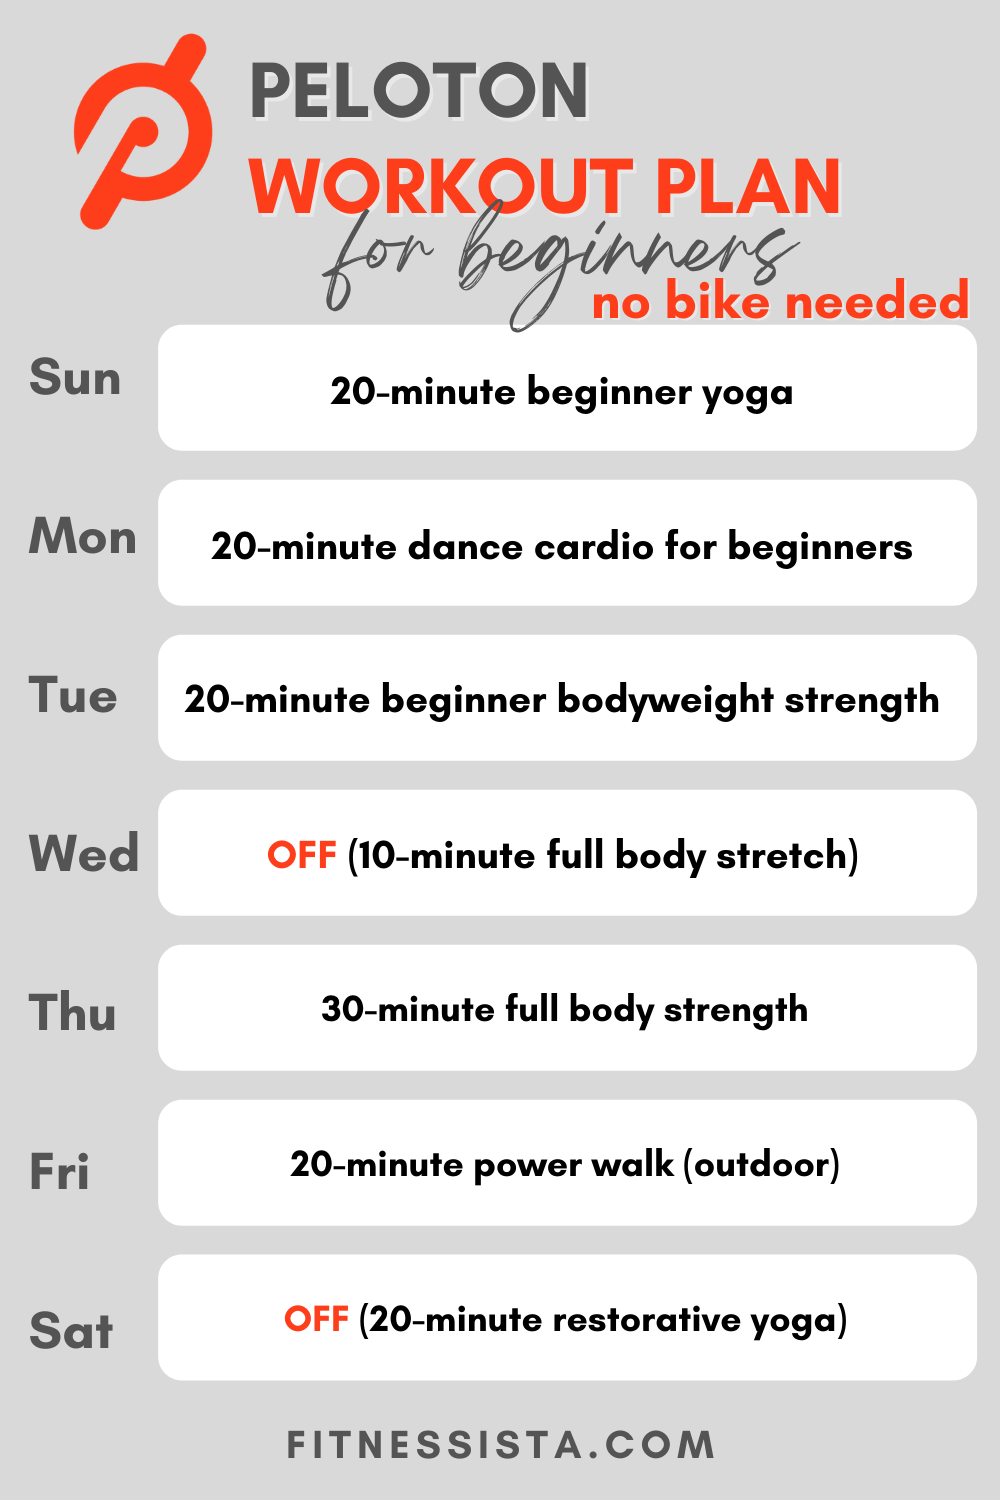 Peloton Workout Plan for Beginners and Bodyweight